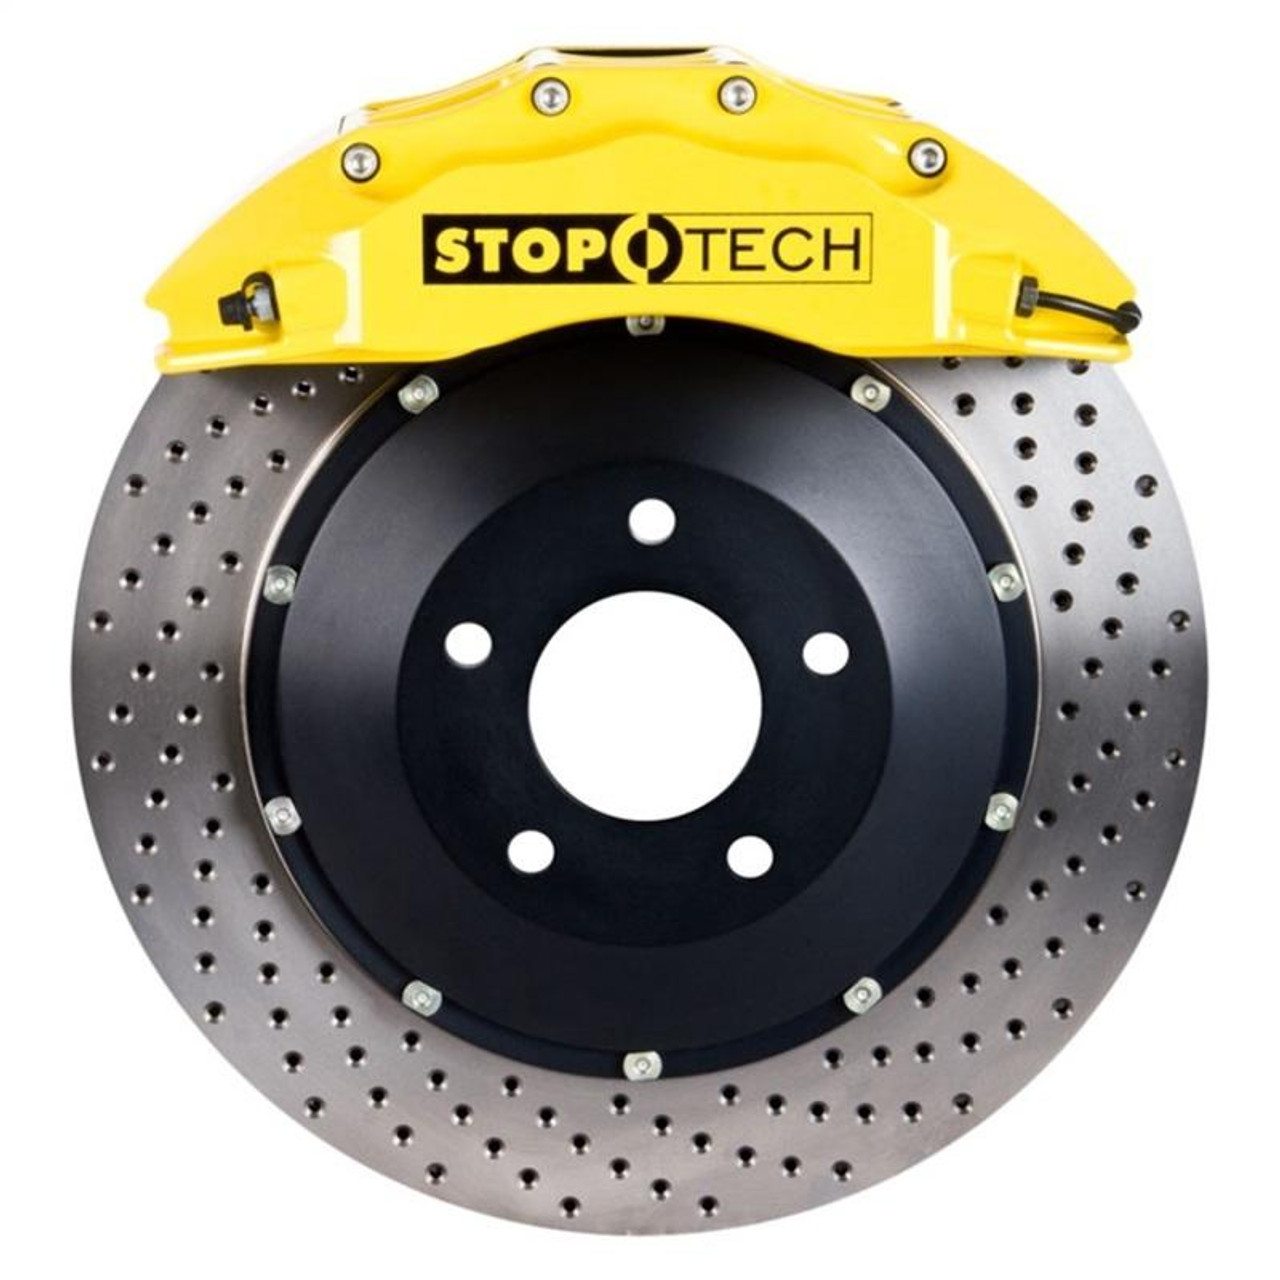 Stoptech StopTech 12-13 VW Golf ST-60 Yellow Calipers 355x32mm Drilled Rotors Front Big Brake Kit - 83.894.6700.82